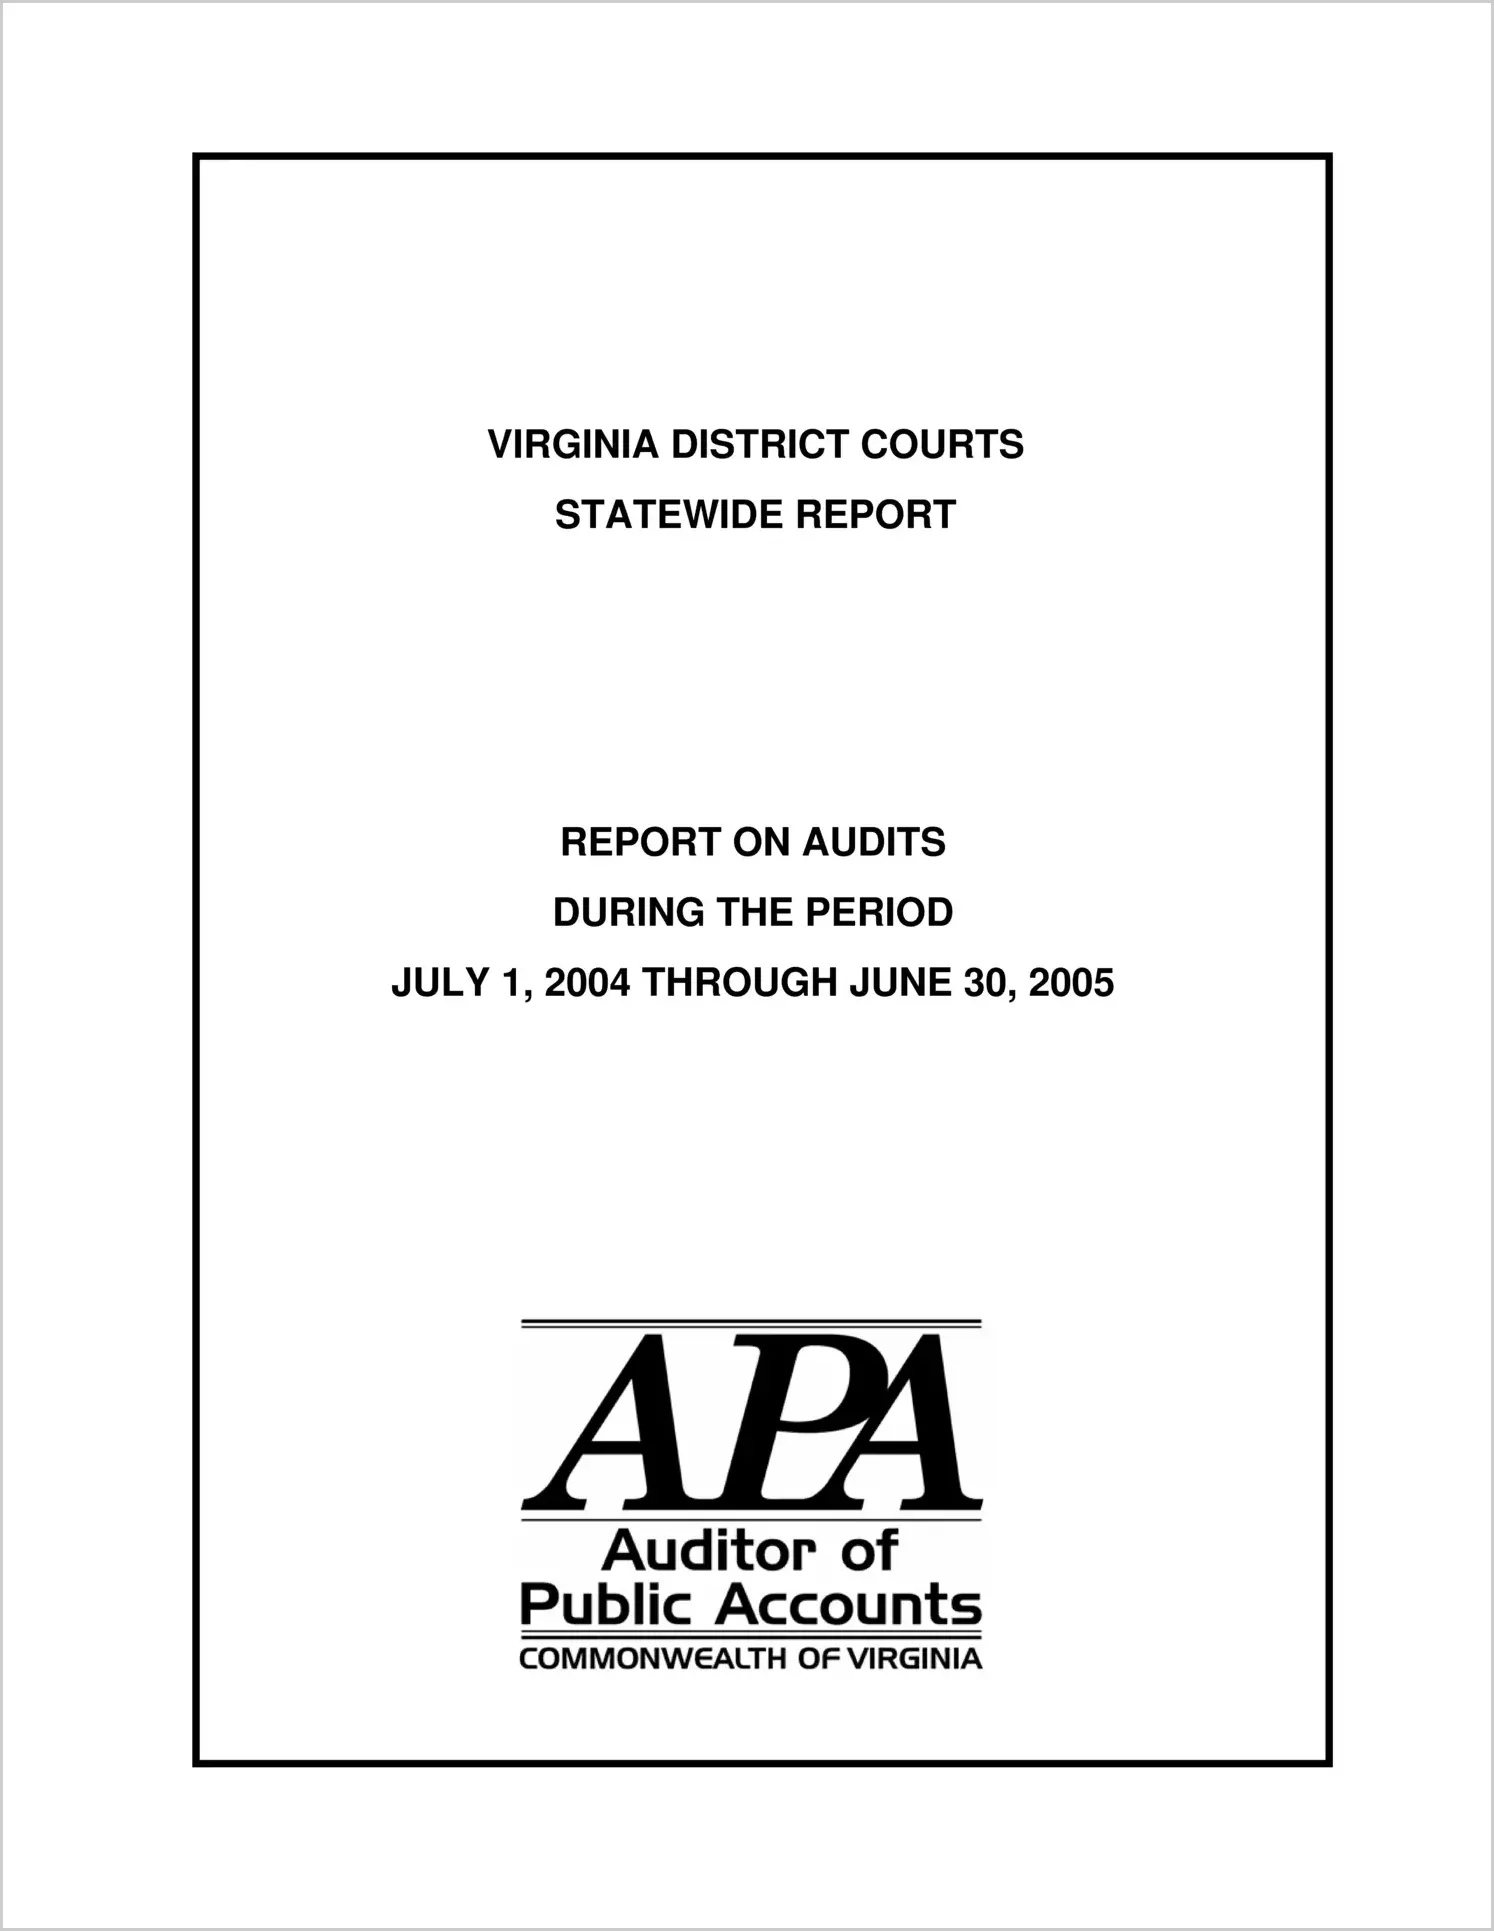 Virginia District Courts Statewide Report during the period July 1, 2004 through June 30, 2005